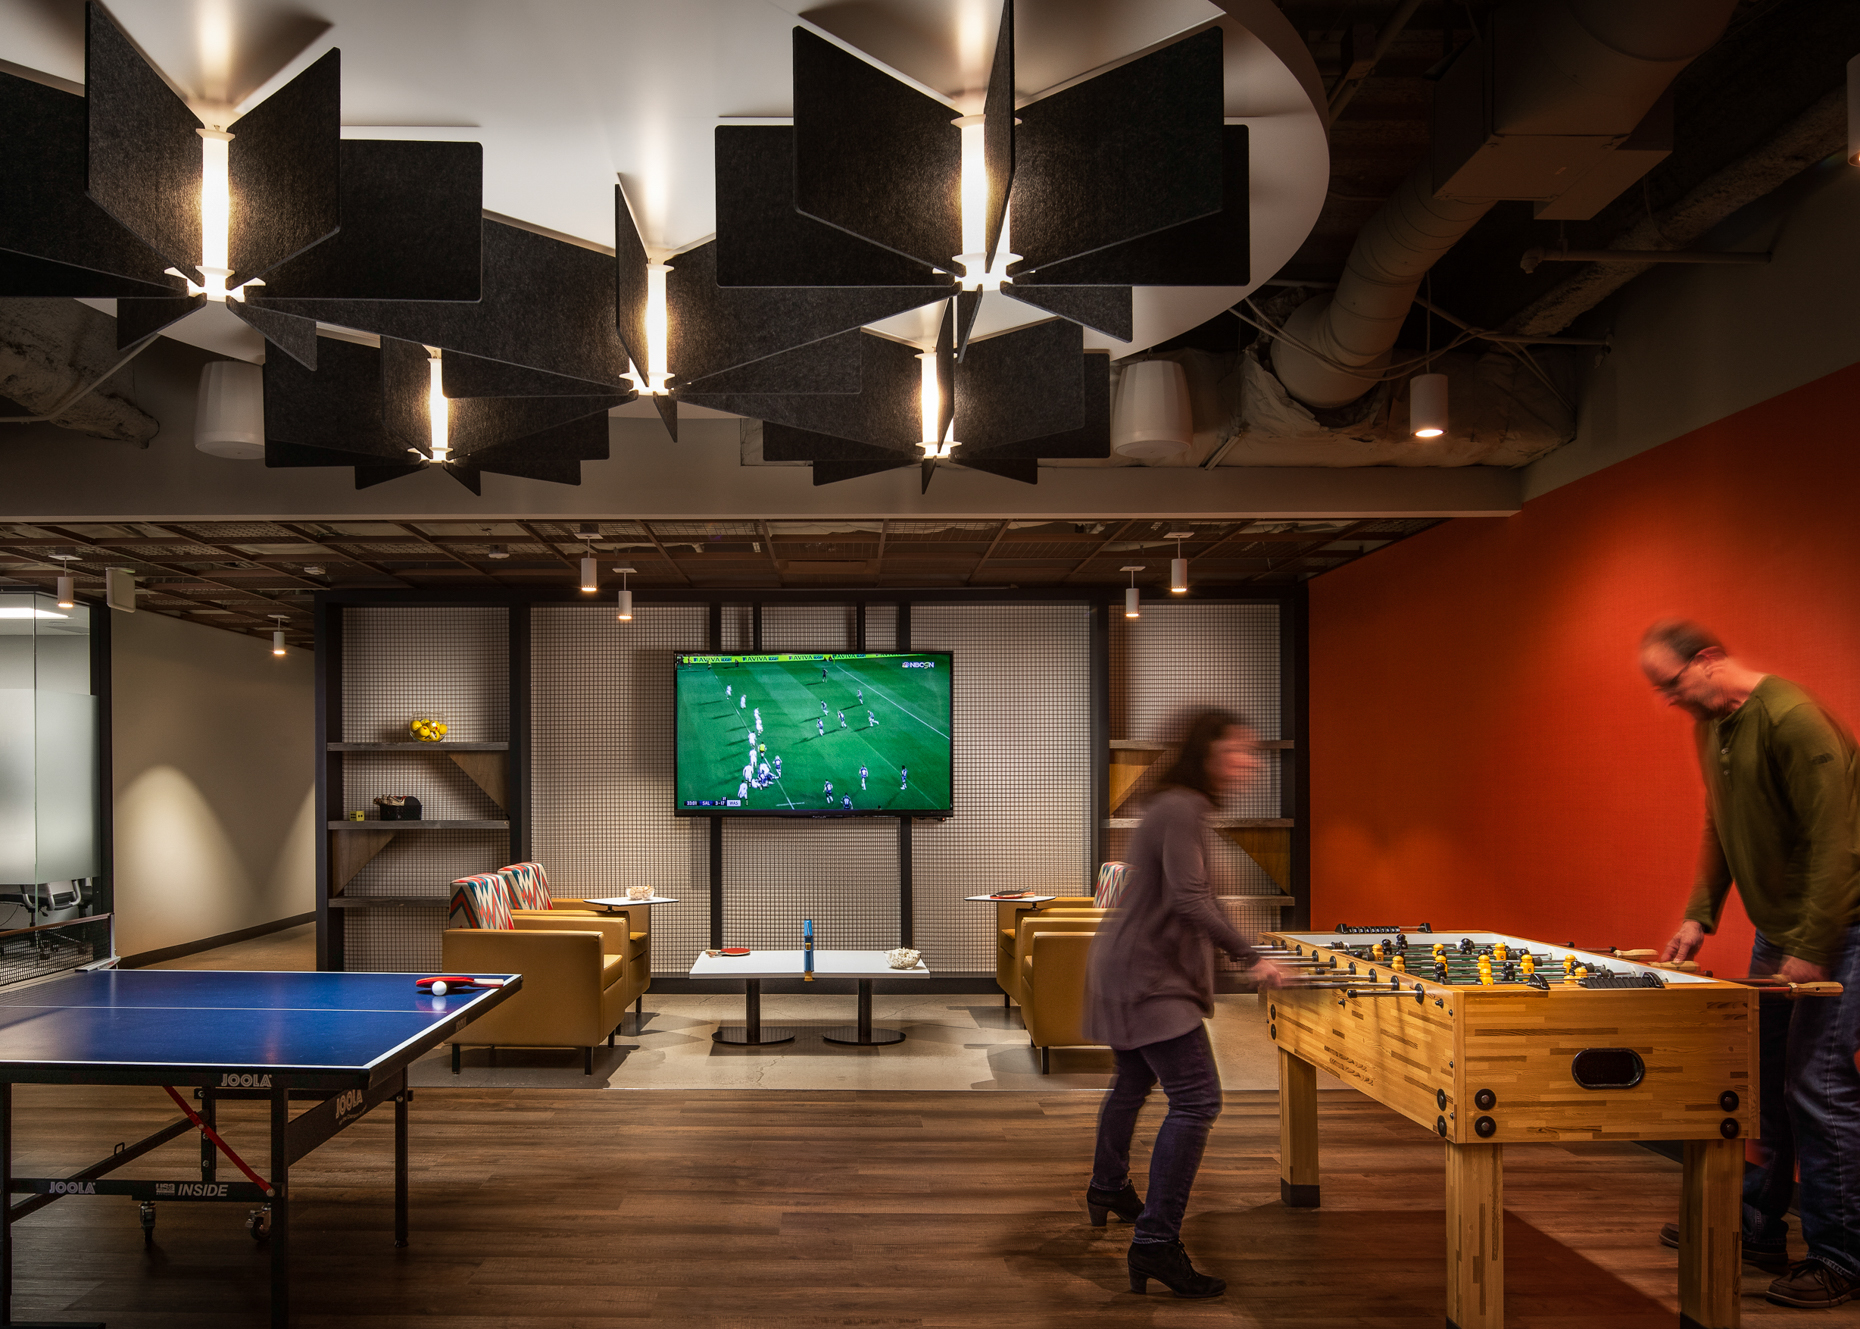 Office Breakroom with people playing Foosball, image taken by Architectural Photographers in Western North Carolina